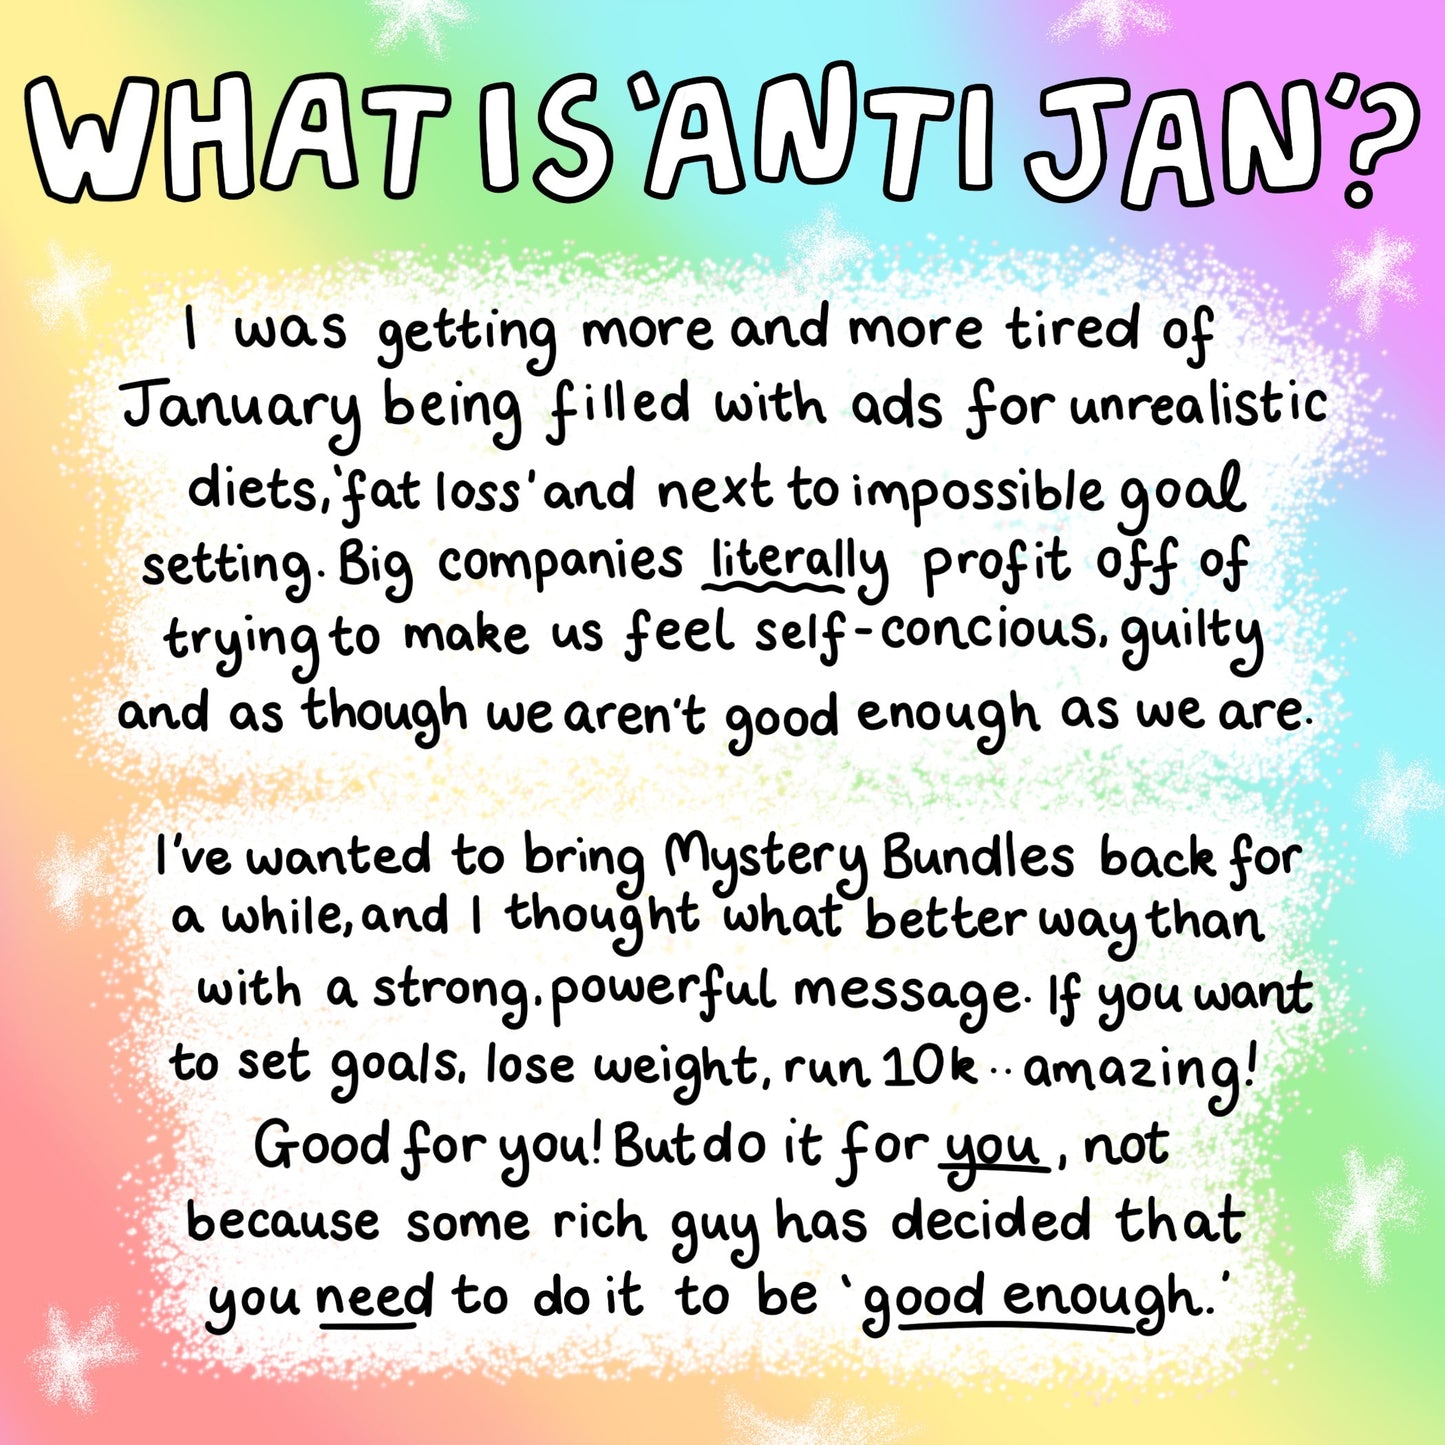 Anti-Jan Sheets (Exclusive Subscription Access)!